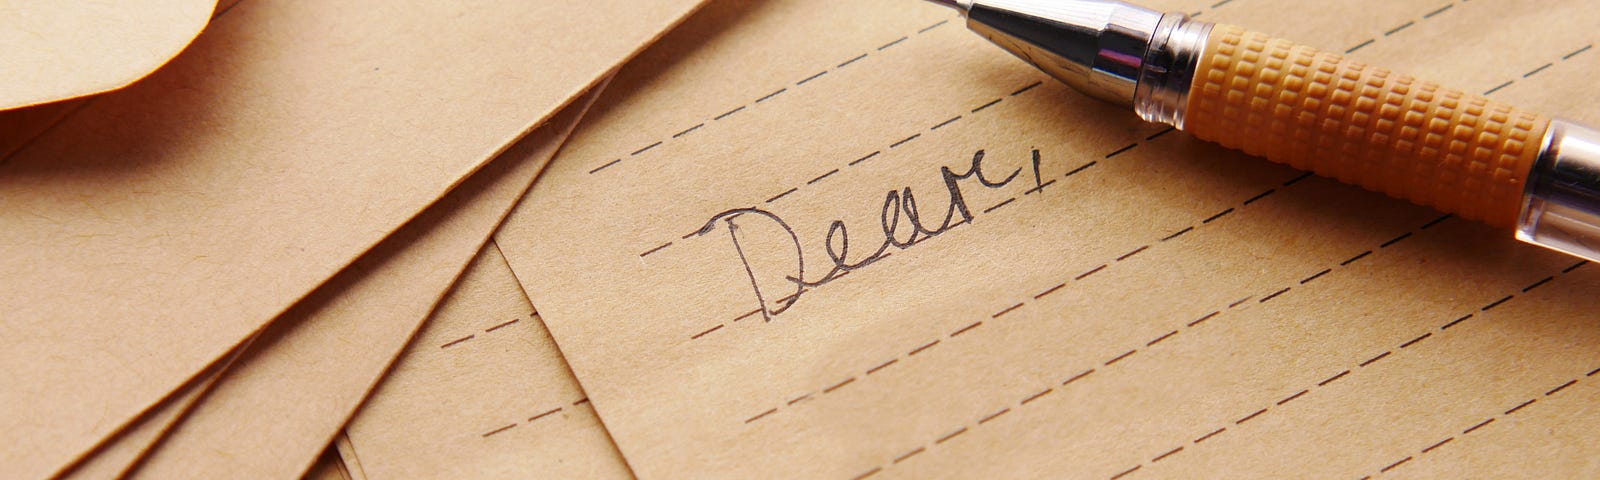 Image of a pen and paper with the greeting “dear” written.